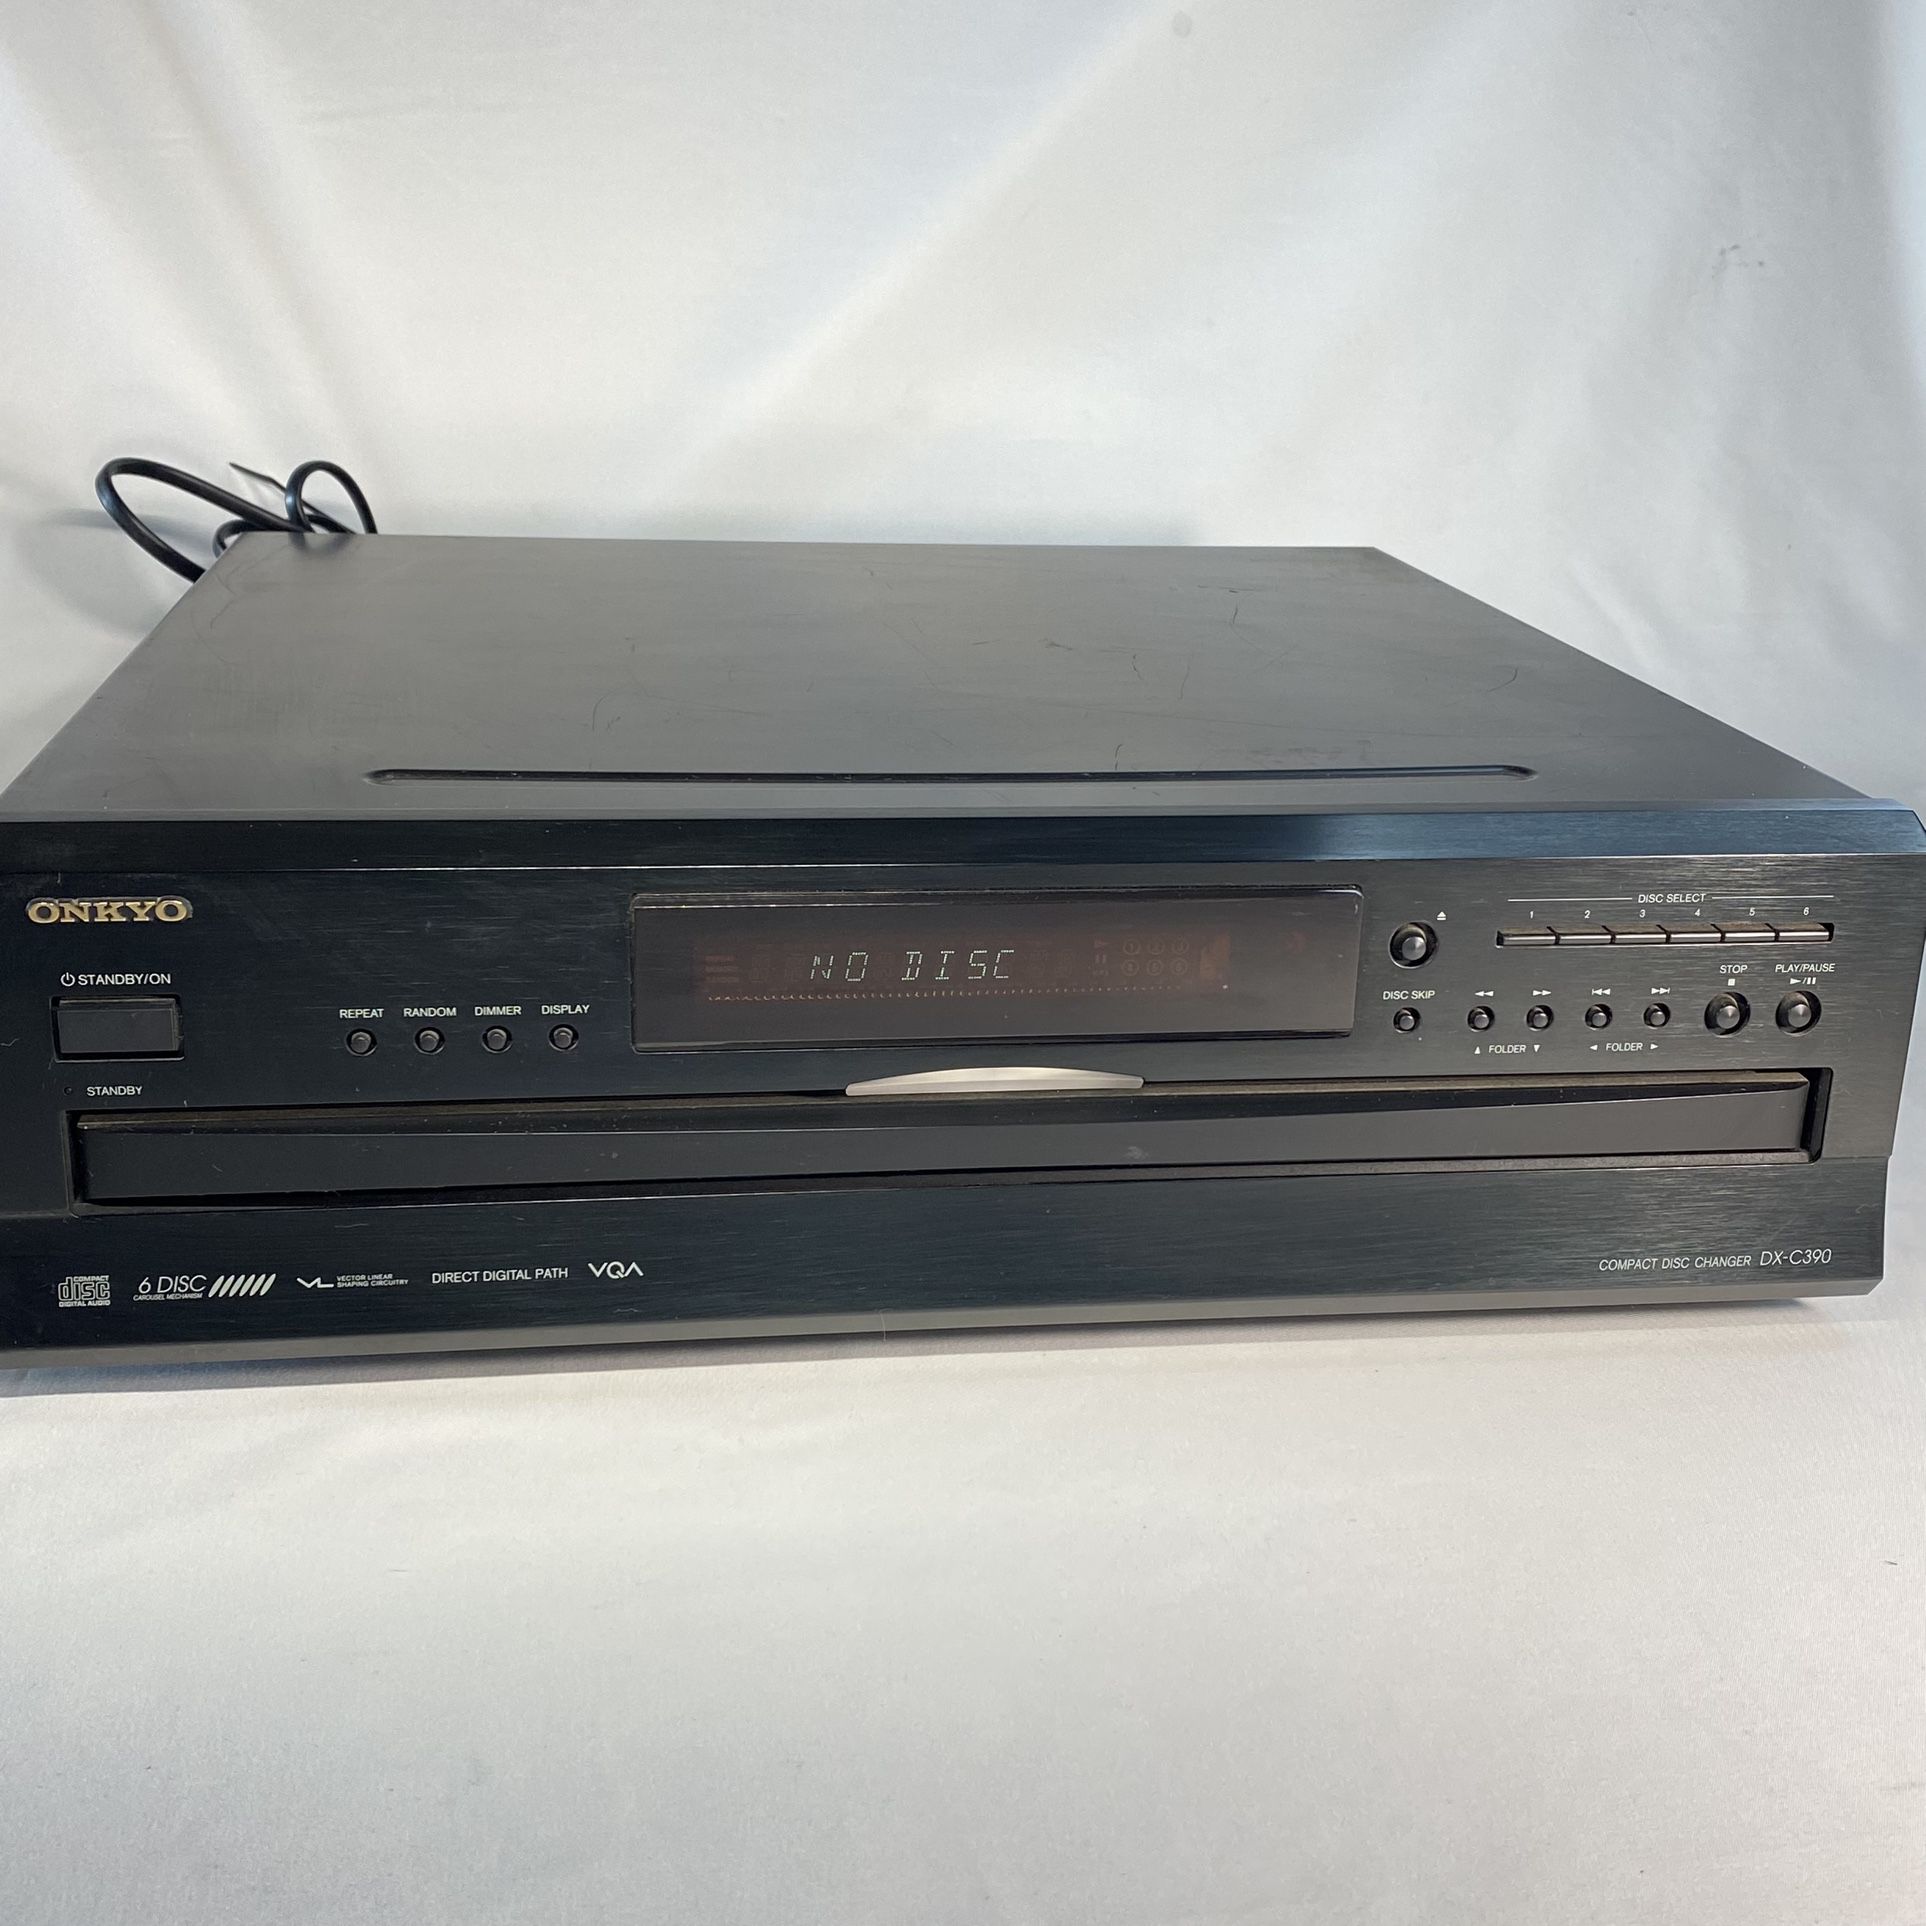 Onkyo DX-C390 Compact Disc Changer 6 Disc - Excellent Condition Works Great Used